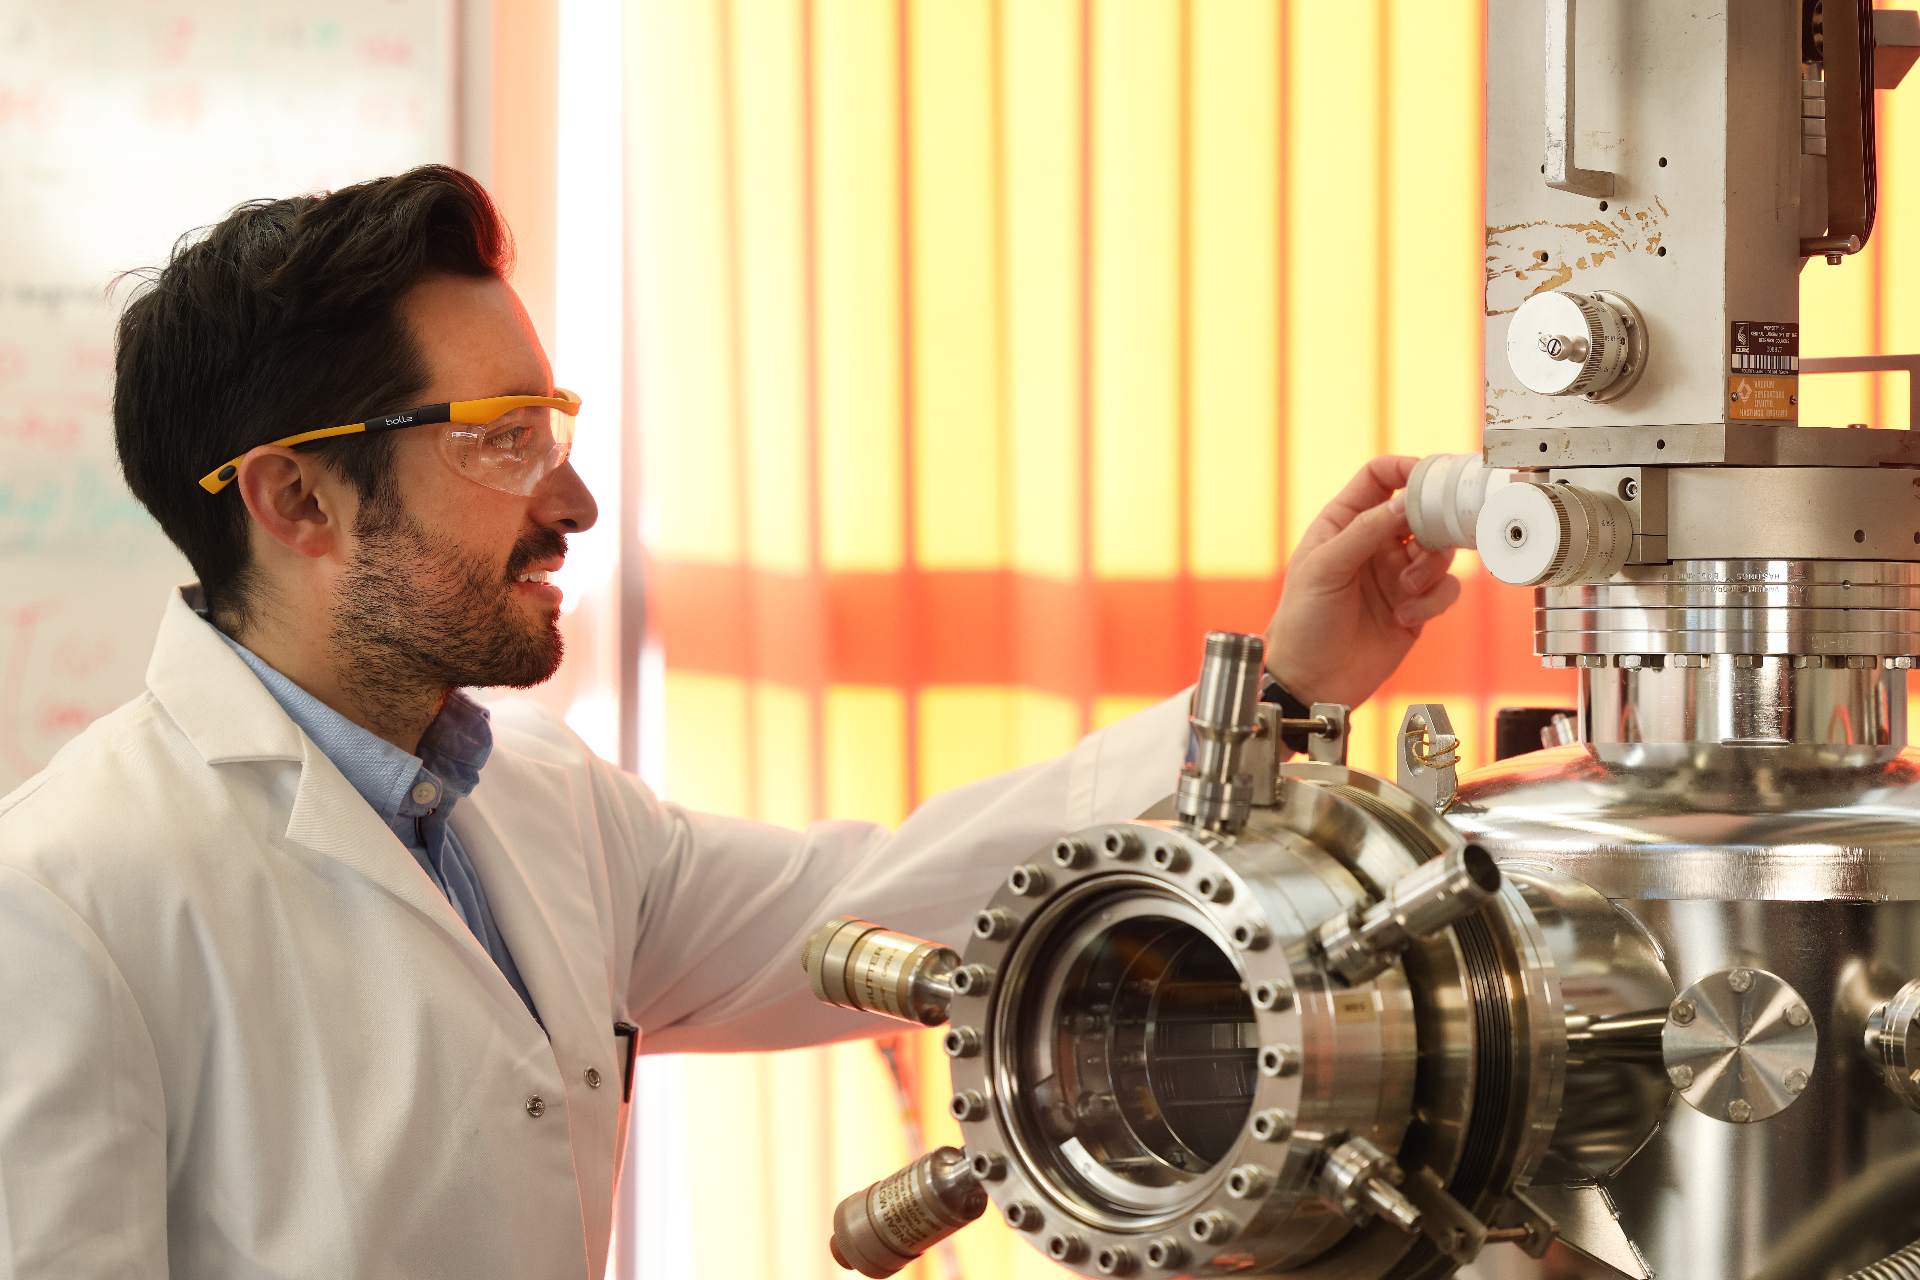 A male student works in a lab with equipment. He is wearing safety goggles and a white lab coat.